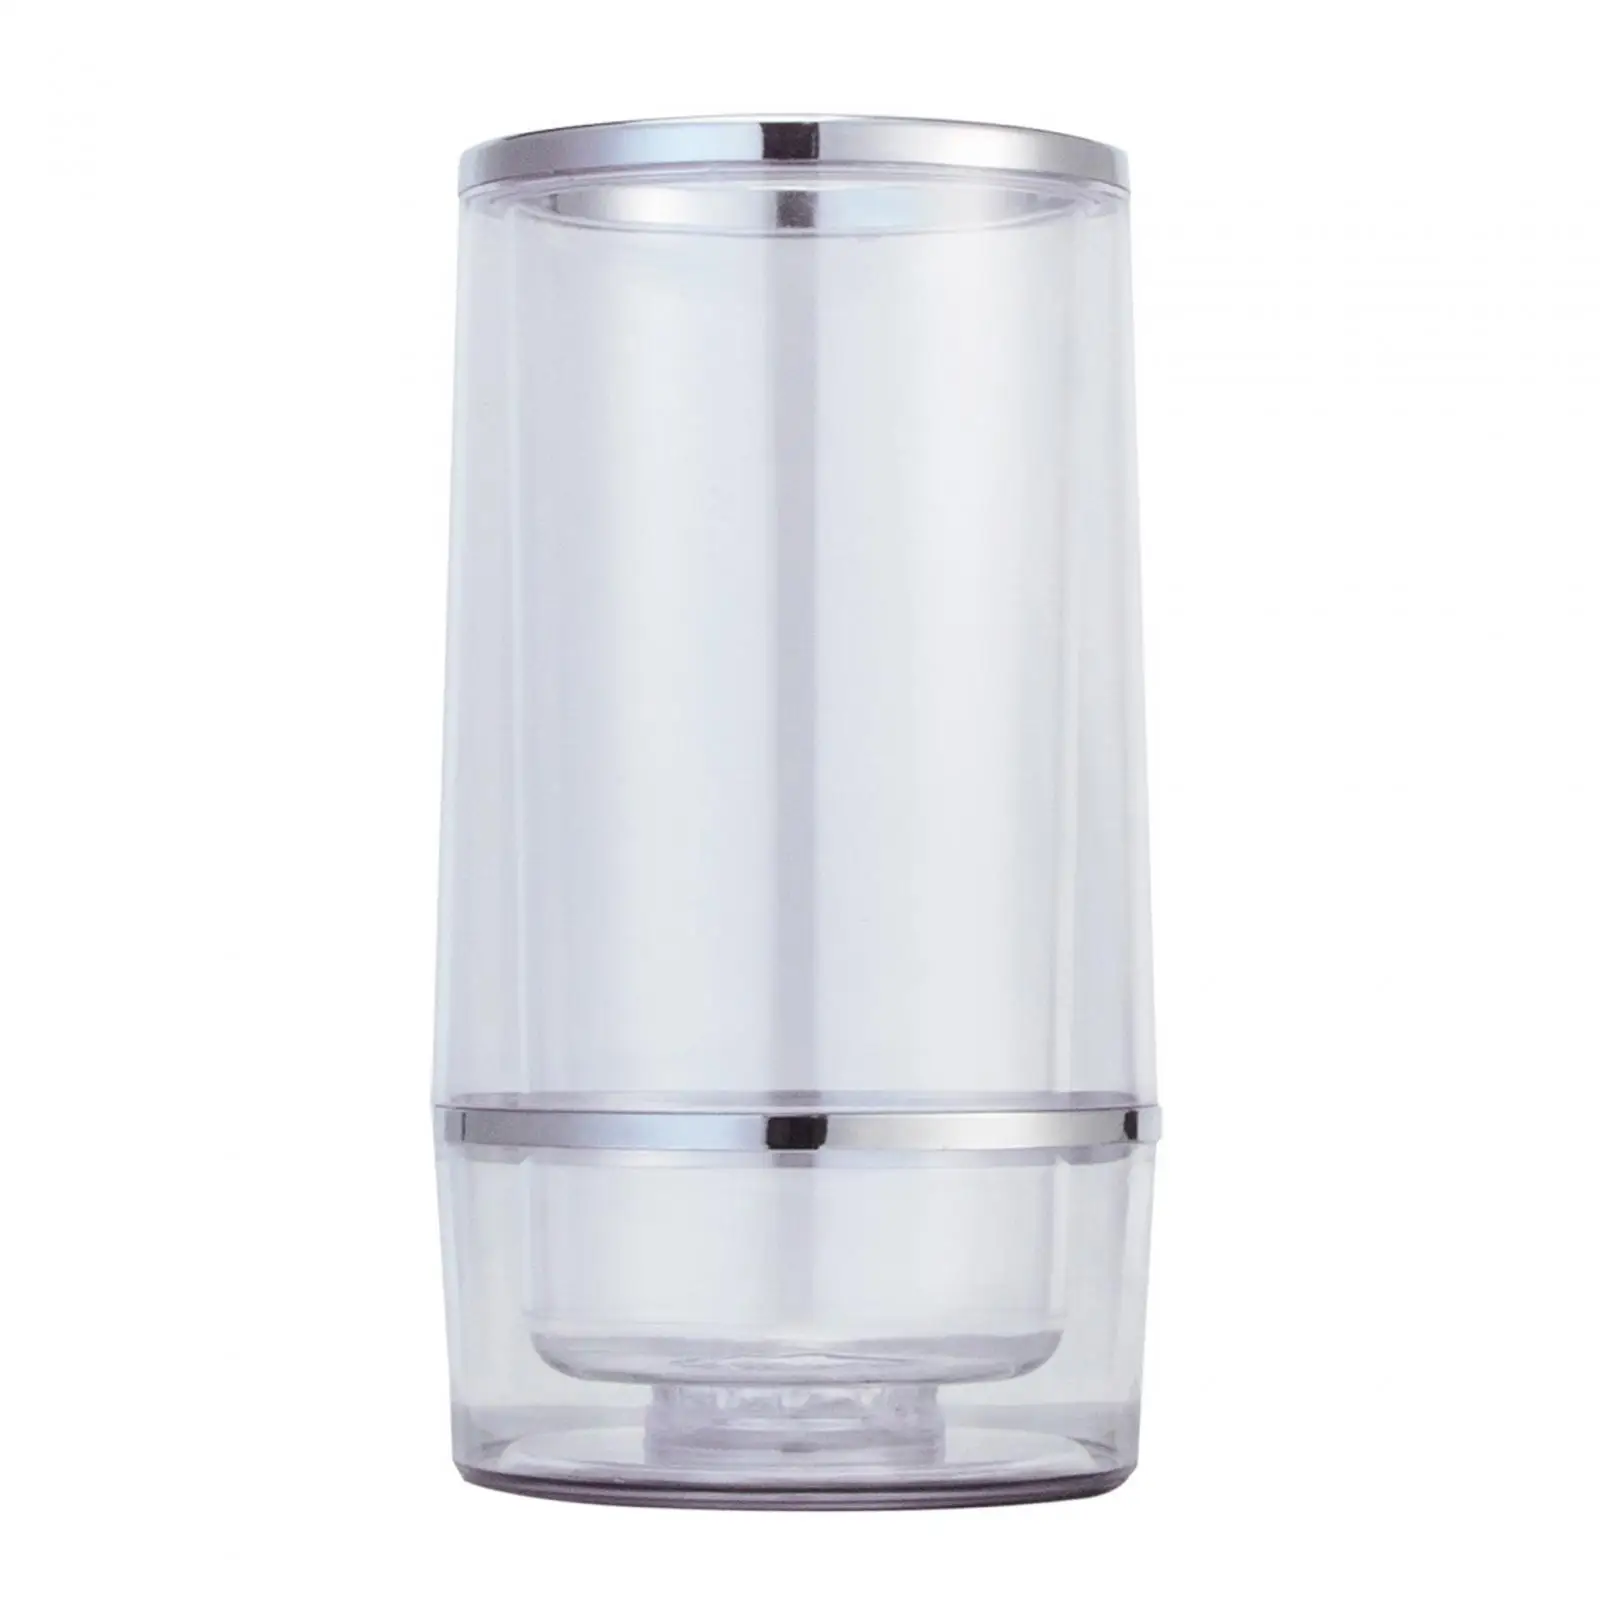 Ice Bucket Cooling Bucket Creative Transparent Beer Chiller Champagne Bucket Ice Tub for Gatherings Picnic Cafe